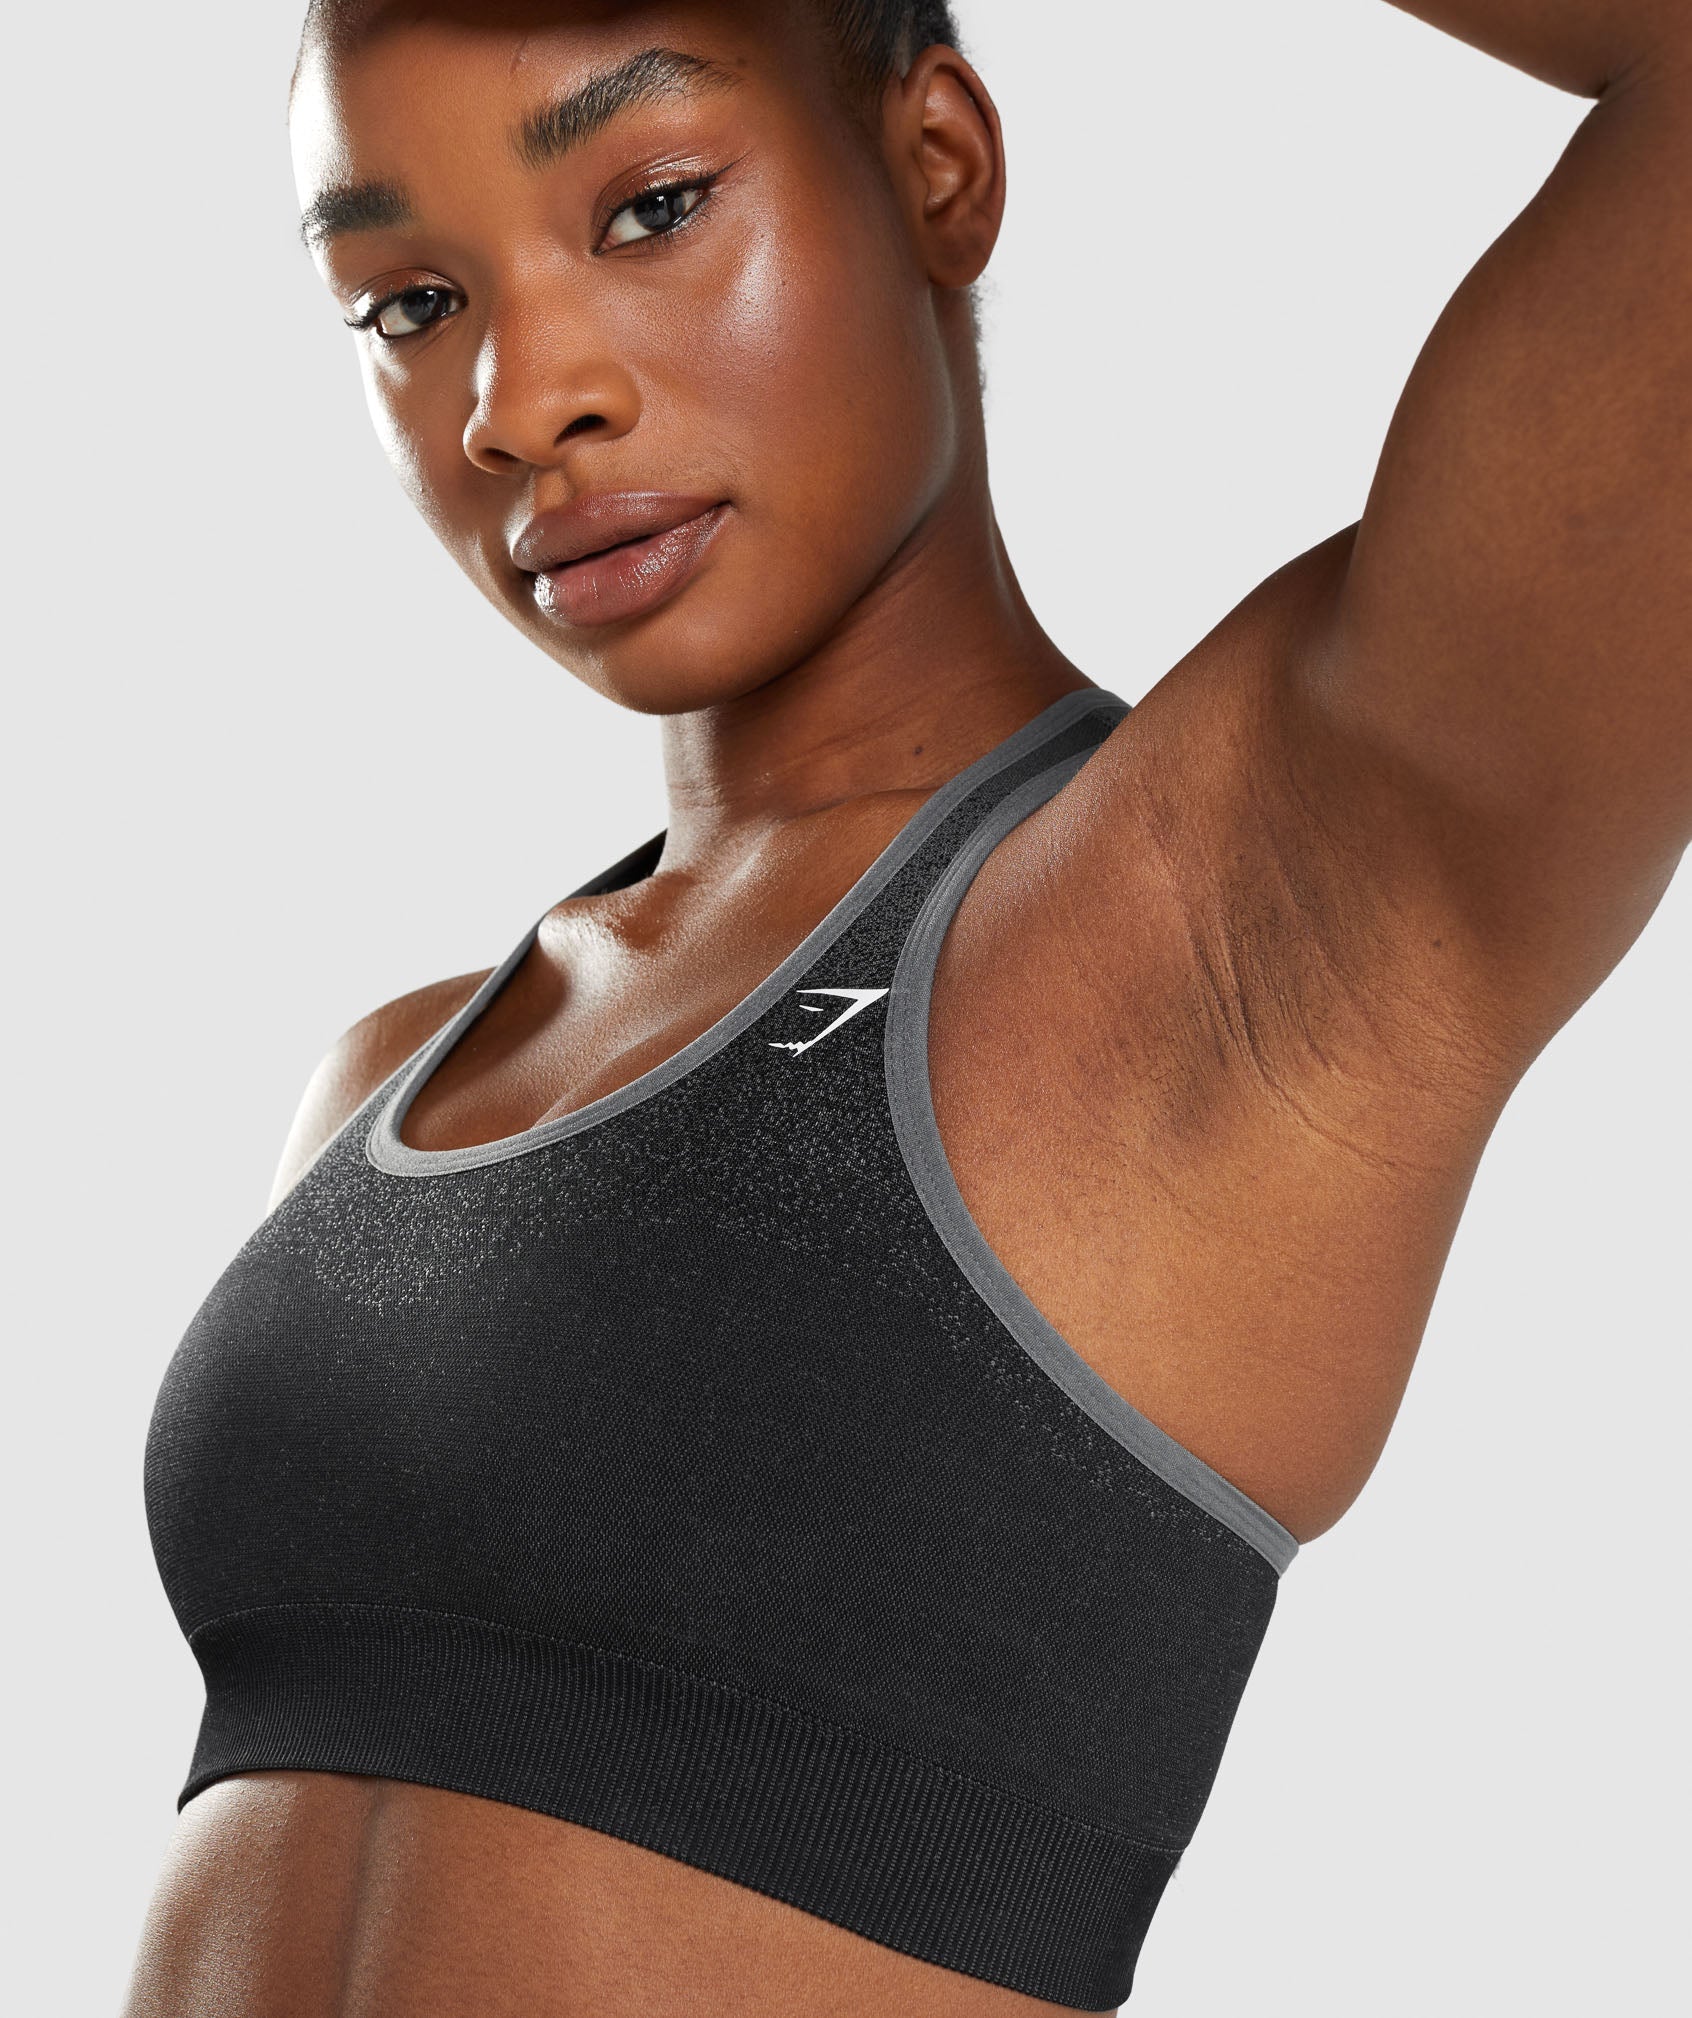 Gymshark NEW RELEASES, VITAL SEAMLESS 2.0, Adapt Ombré, Release & More